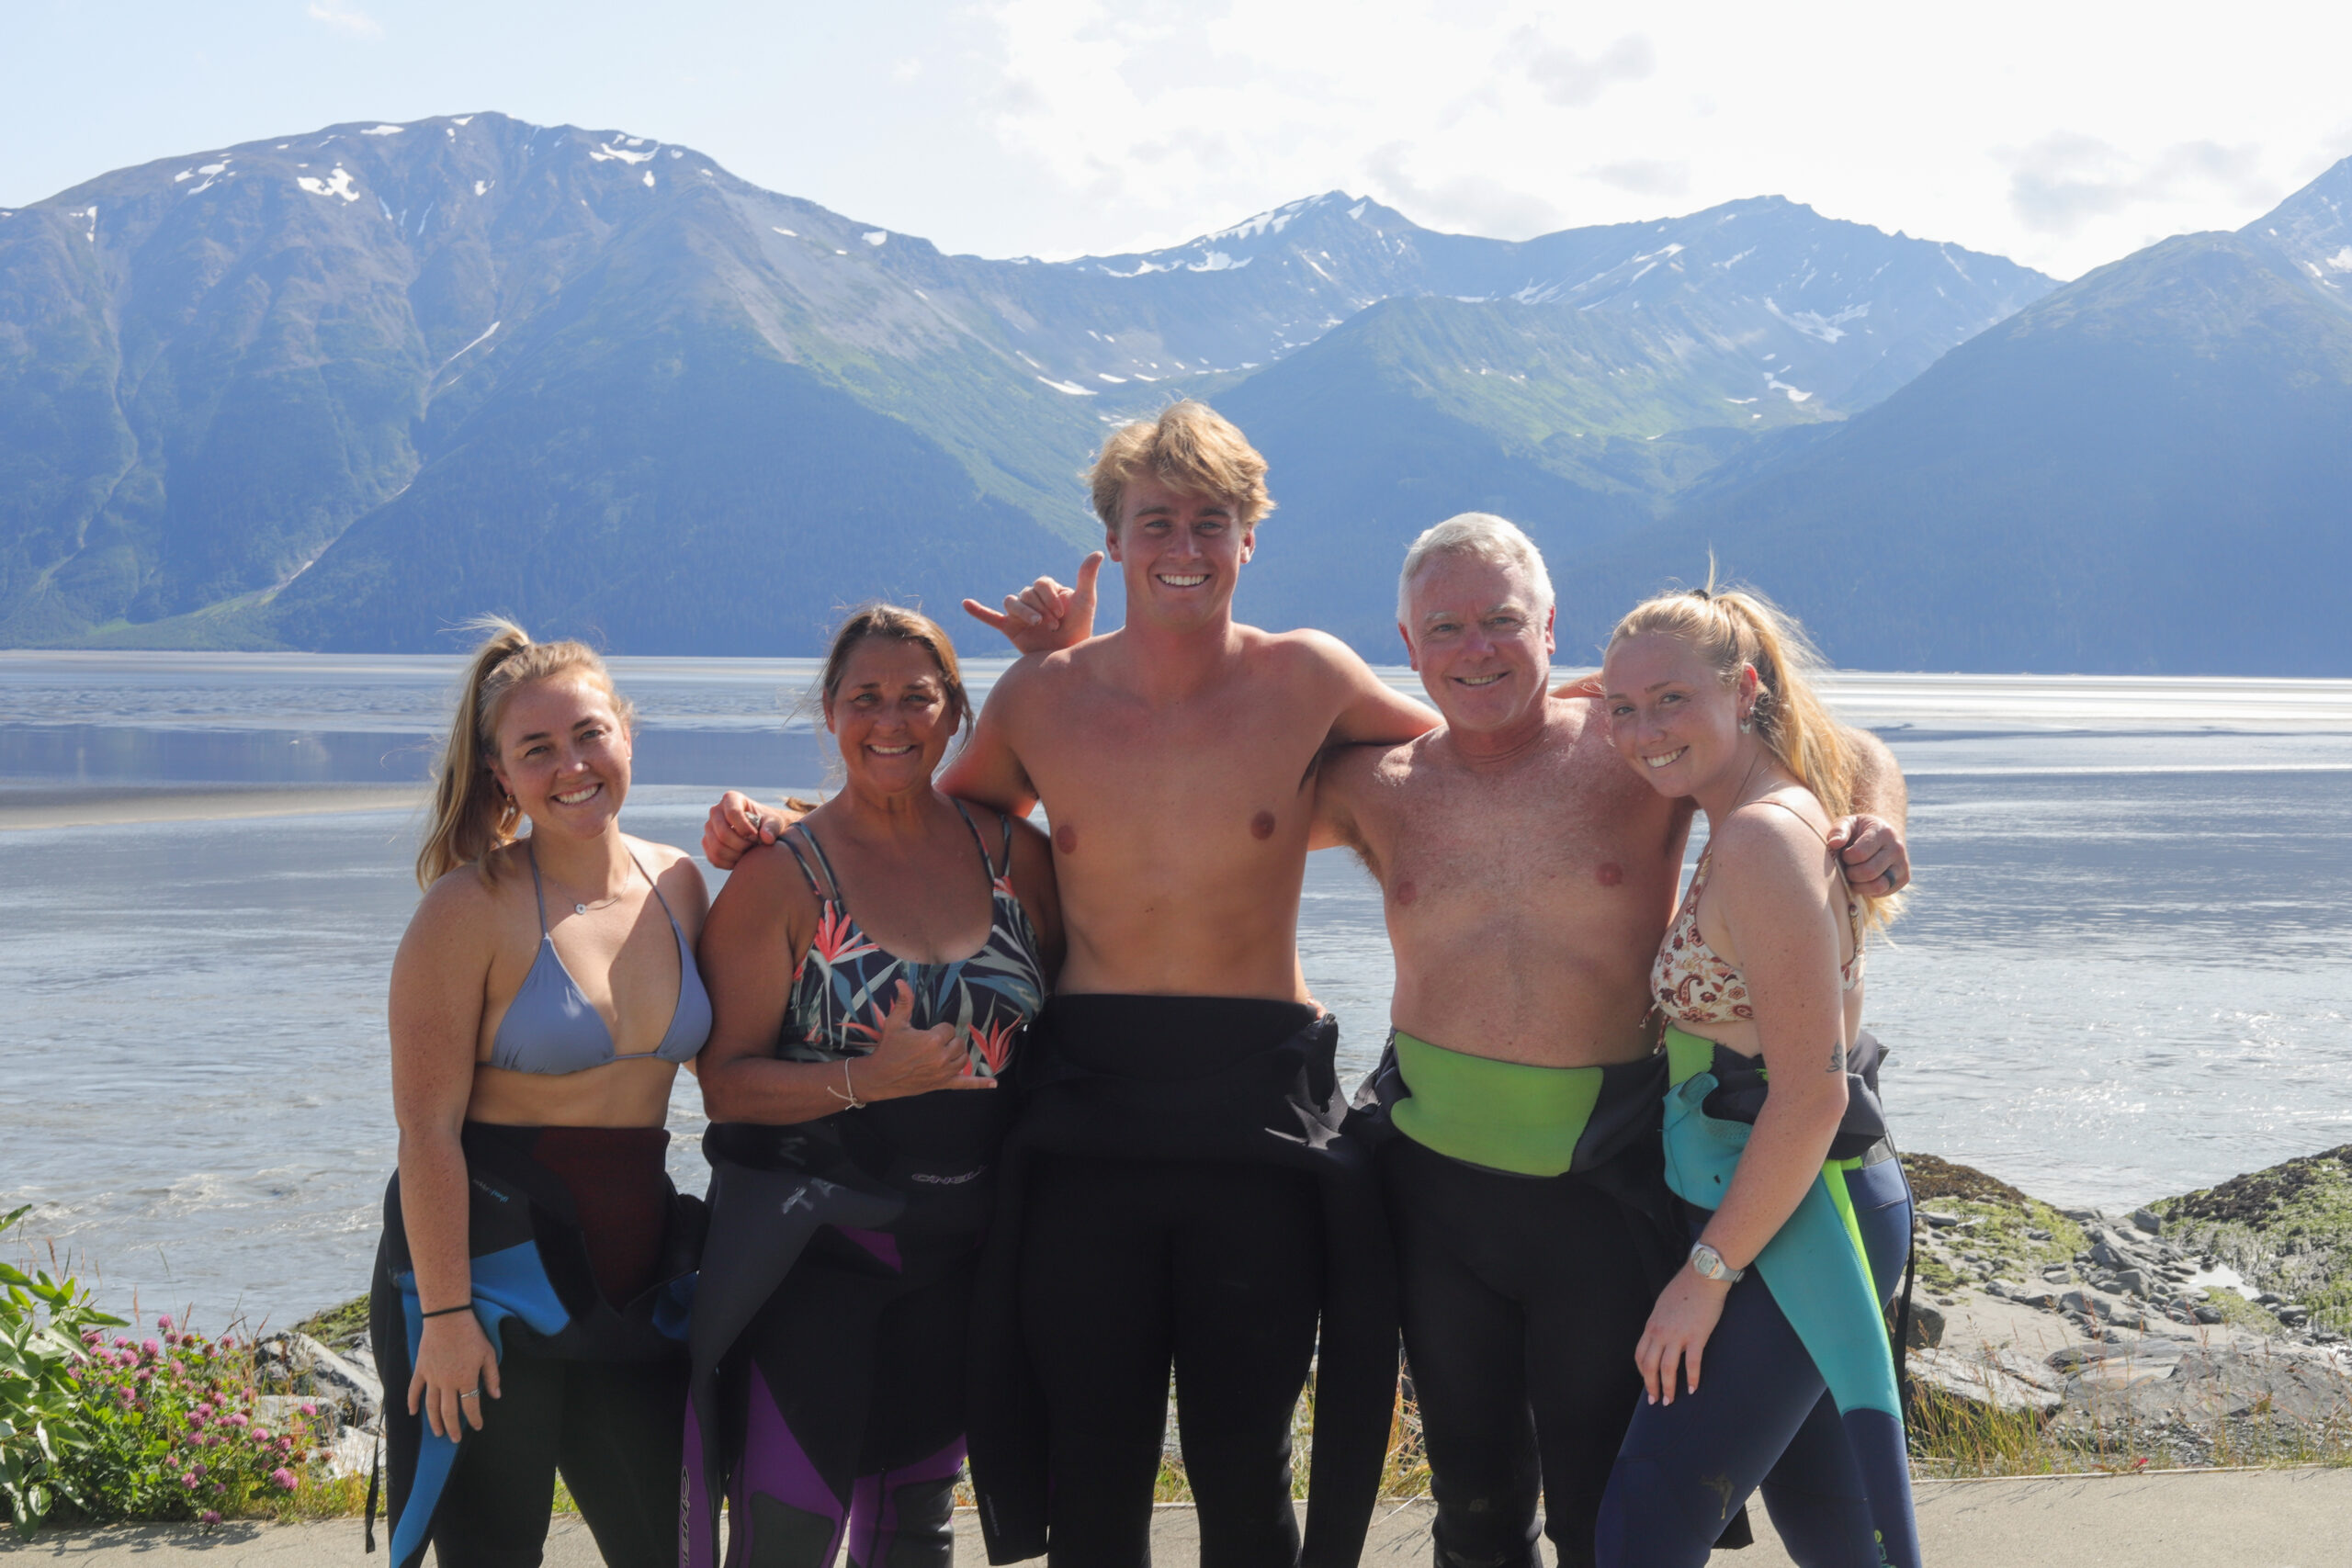 A group of people in wetsuits smile and do the "hang loose" gesture.